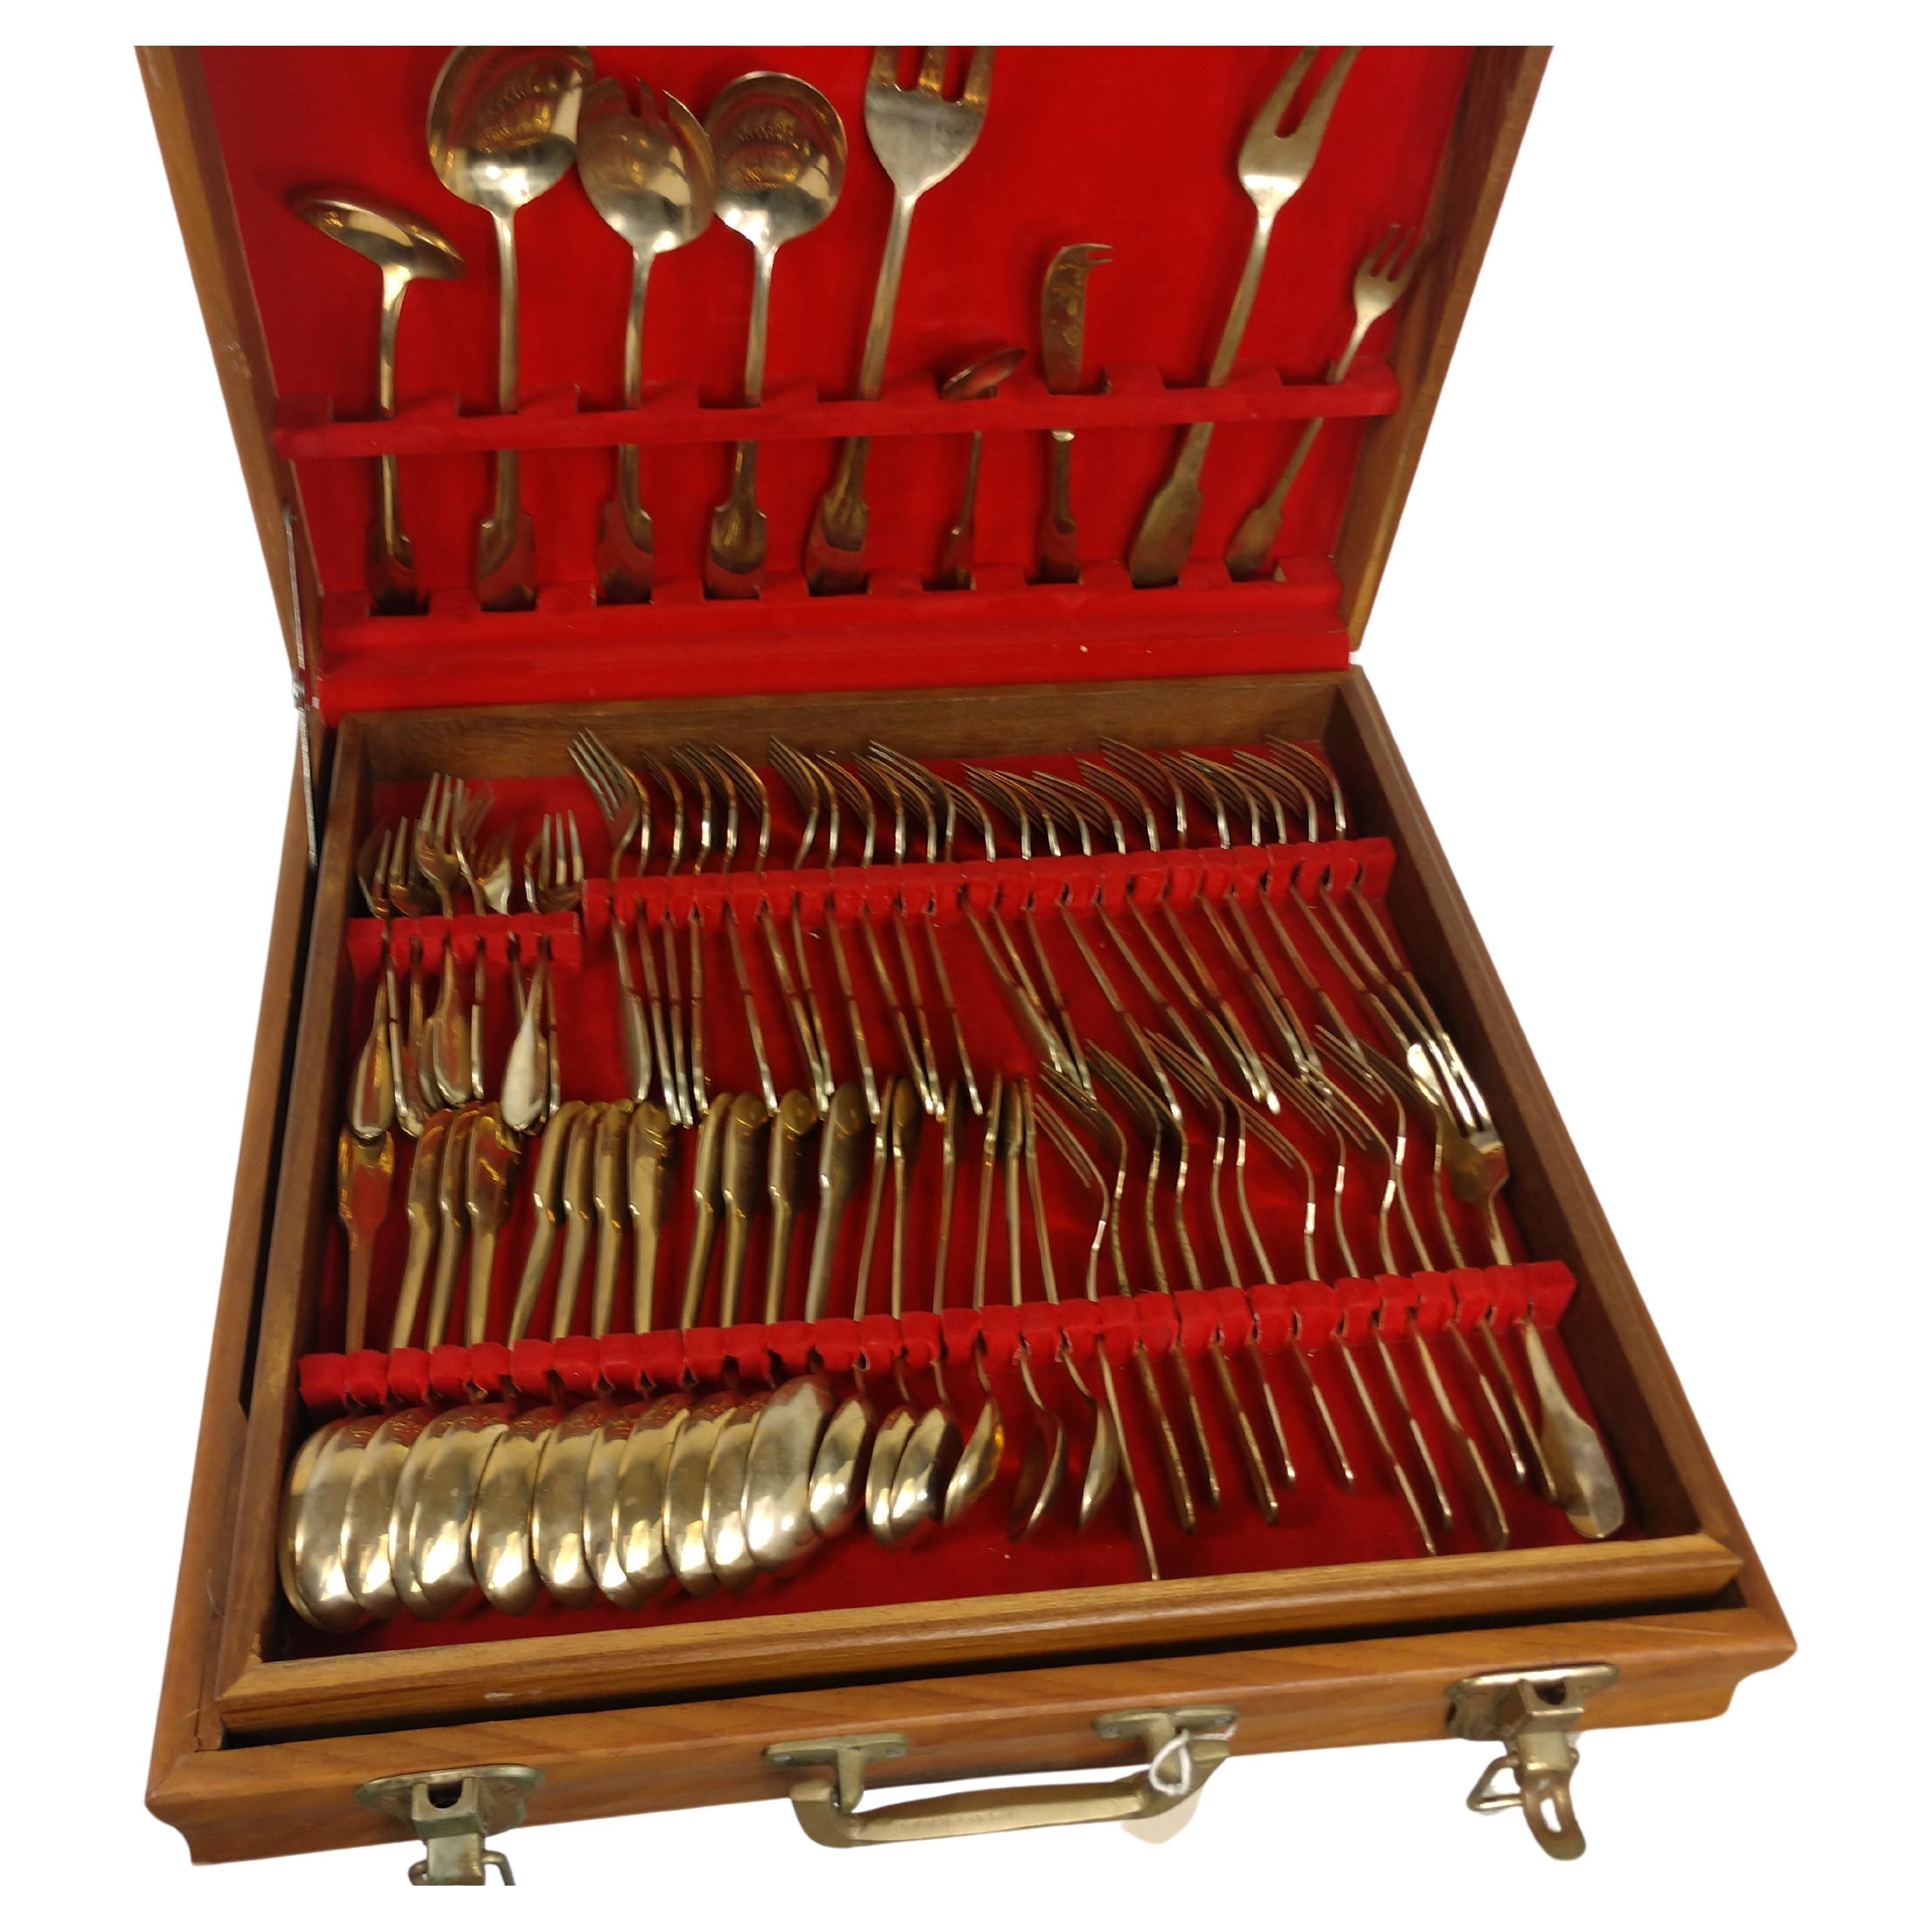 Fabulous full set of nickel bronze flatware from Thailand.
Set consists of 24 dinner knives, 24 dinner forks, 12 large spoons, 12 fish forks, 12 fish knives, 12 ice tea spoons, 12 tea spoons, 12salad forks, 12 butter knives, 10 desert forks and 11